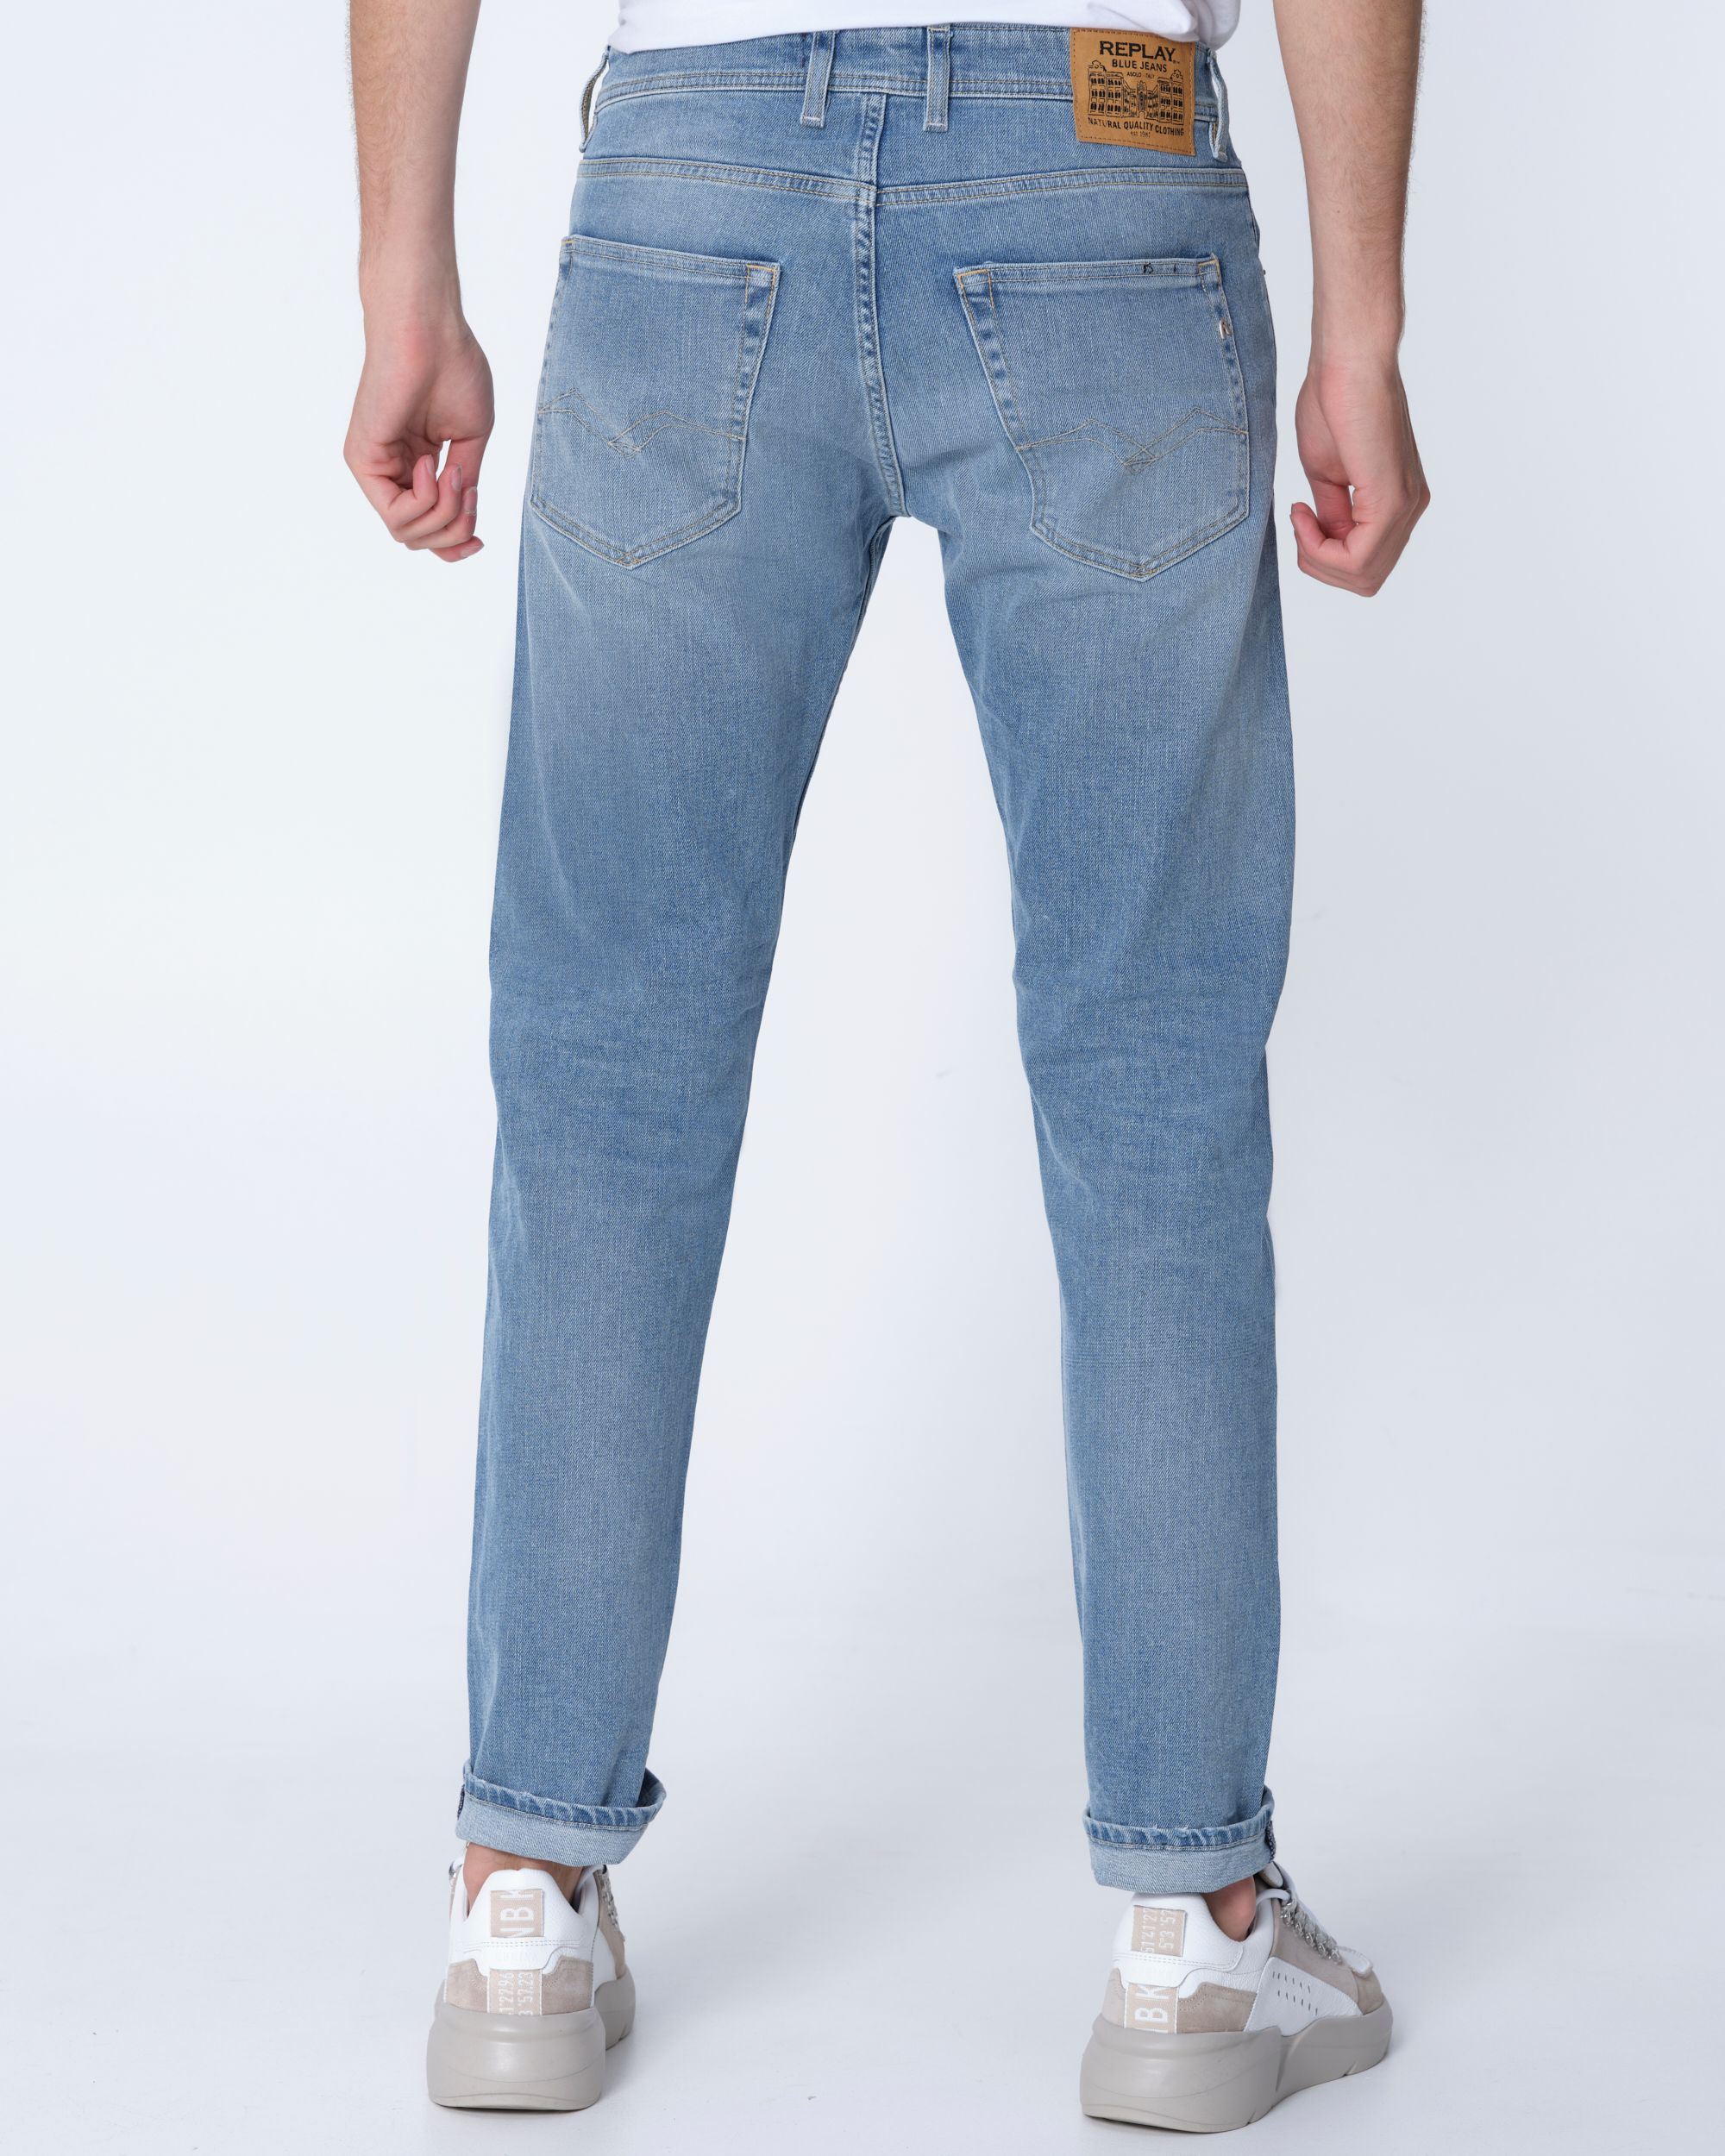 Replay Grover Jeans Blauw 081756-001-30/32